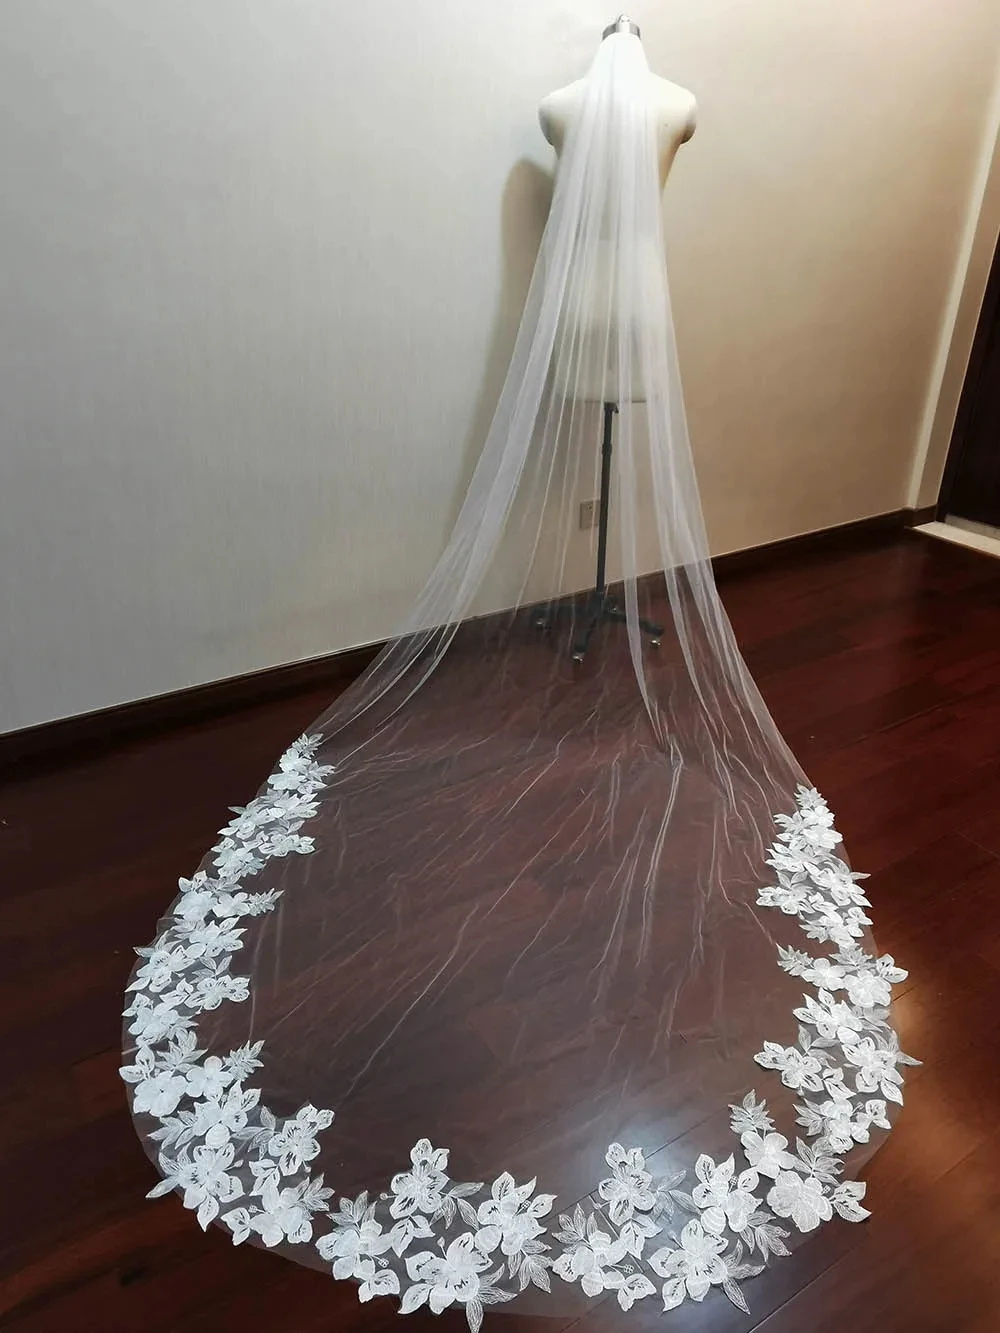 

Soft Tulle Lace Wedding Veil One Layer 3/4/5 Meters Long White Ivory Bridal Veil with Comb Floral Appliques Wedding Accessoreis